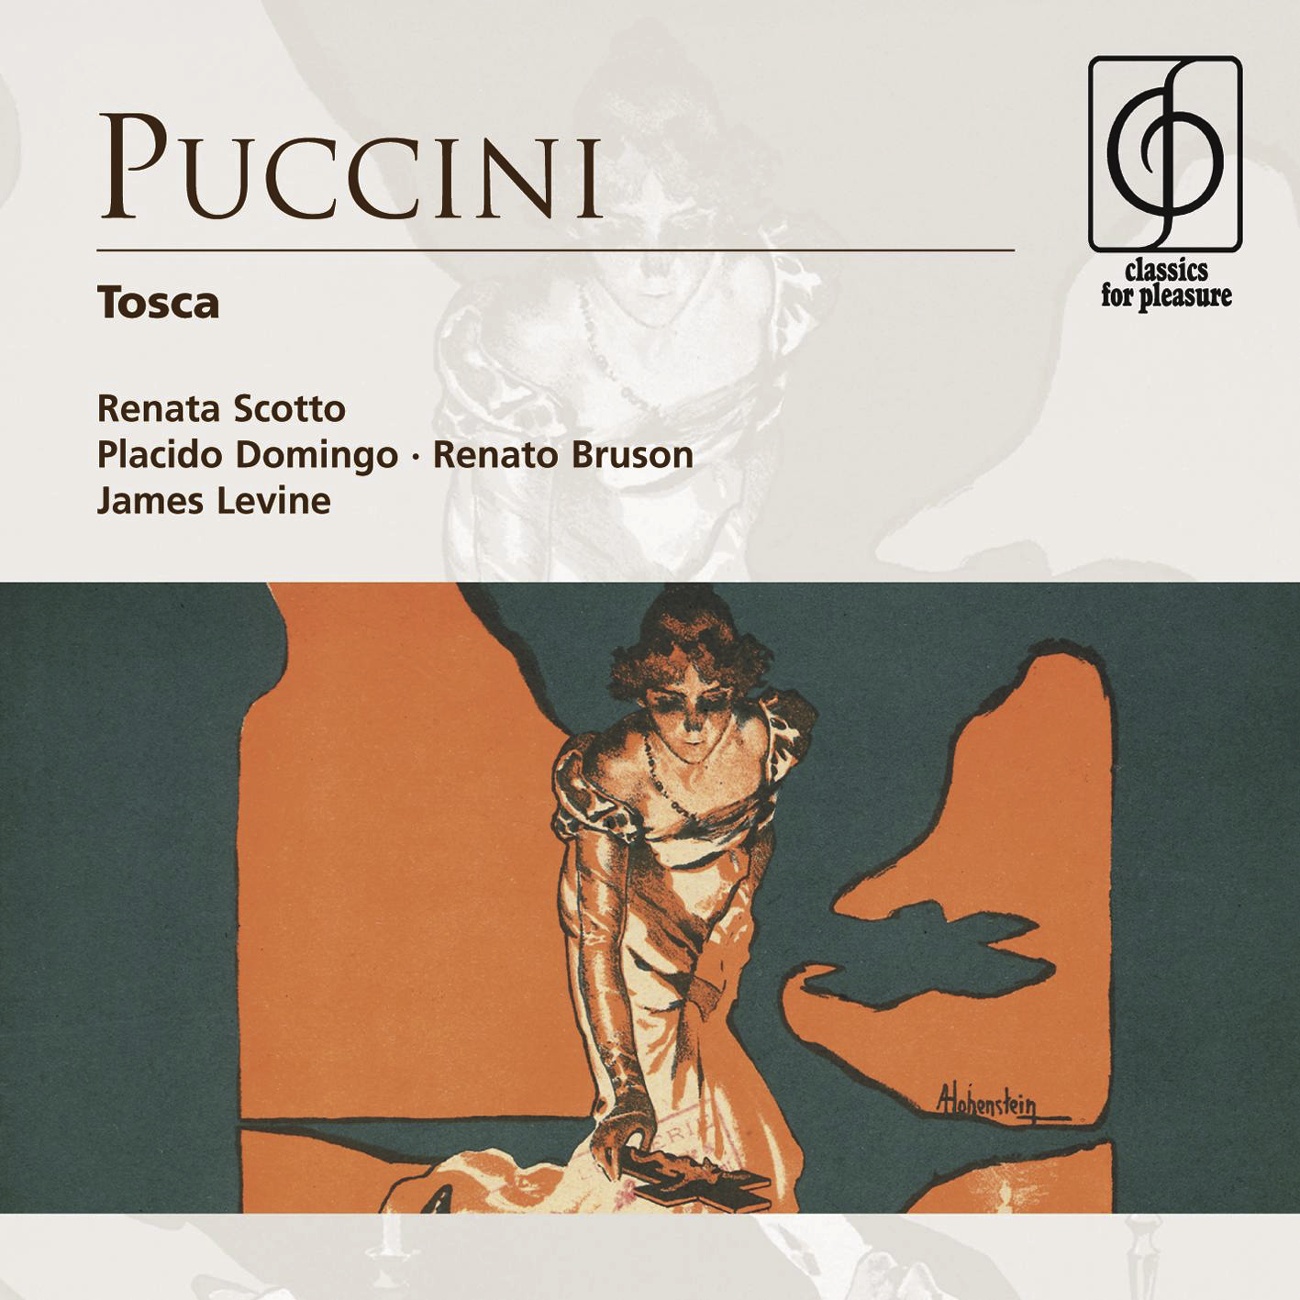 Puccini: Tosca - Opera in three acts